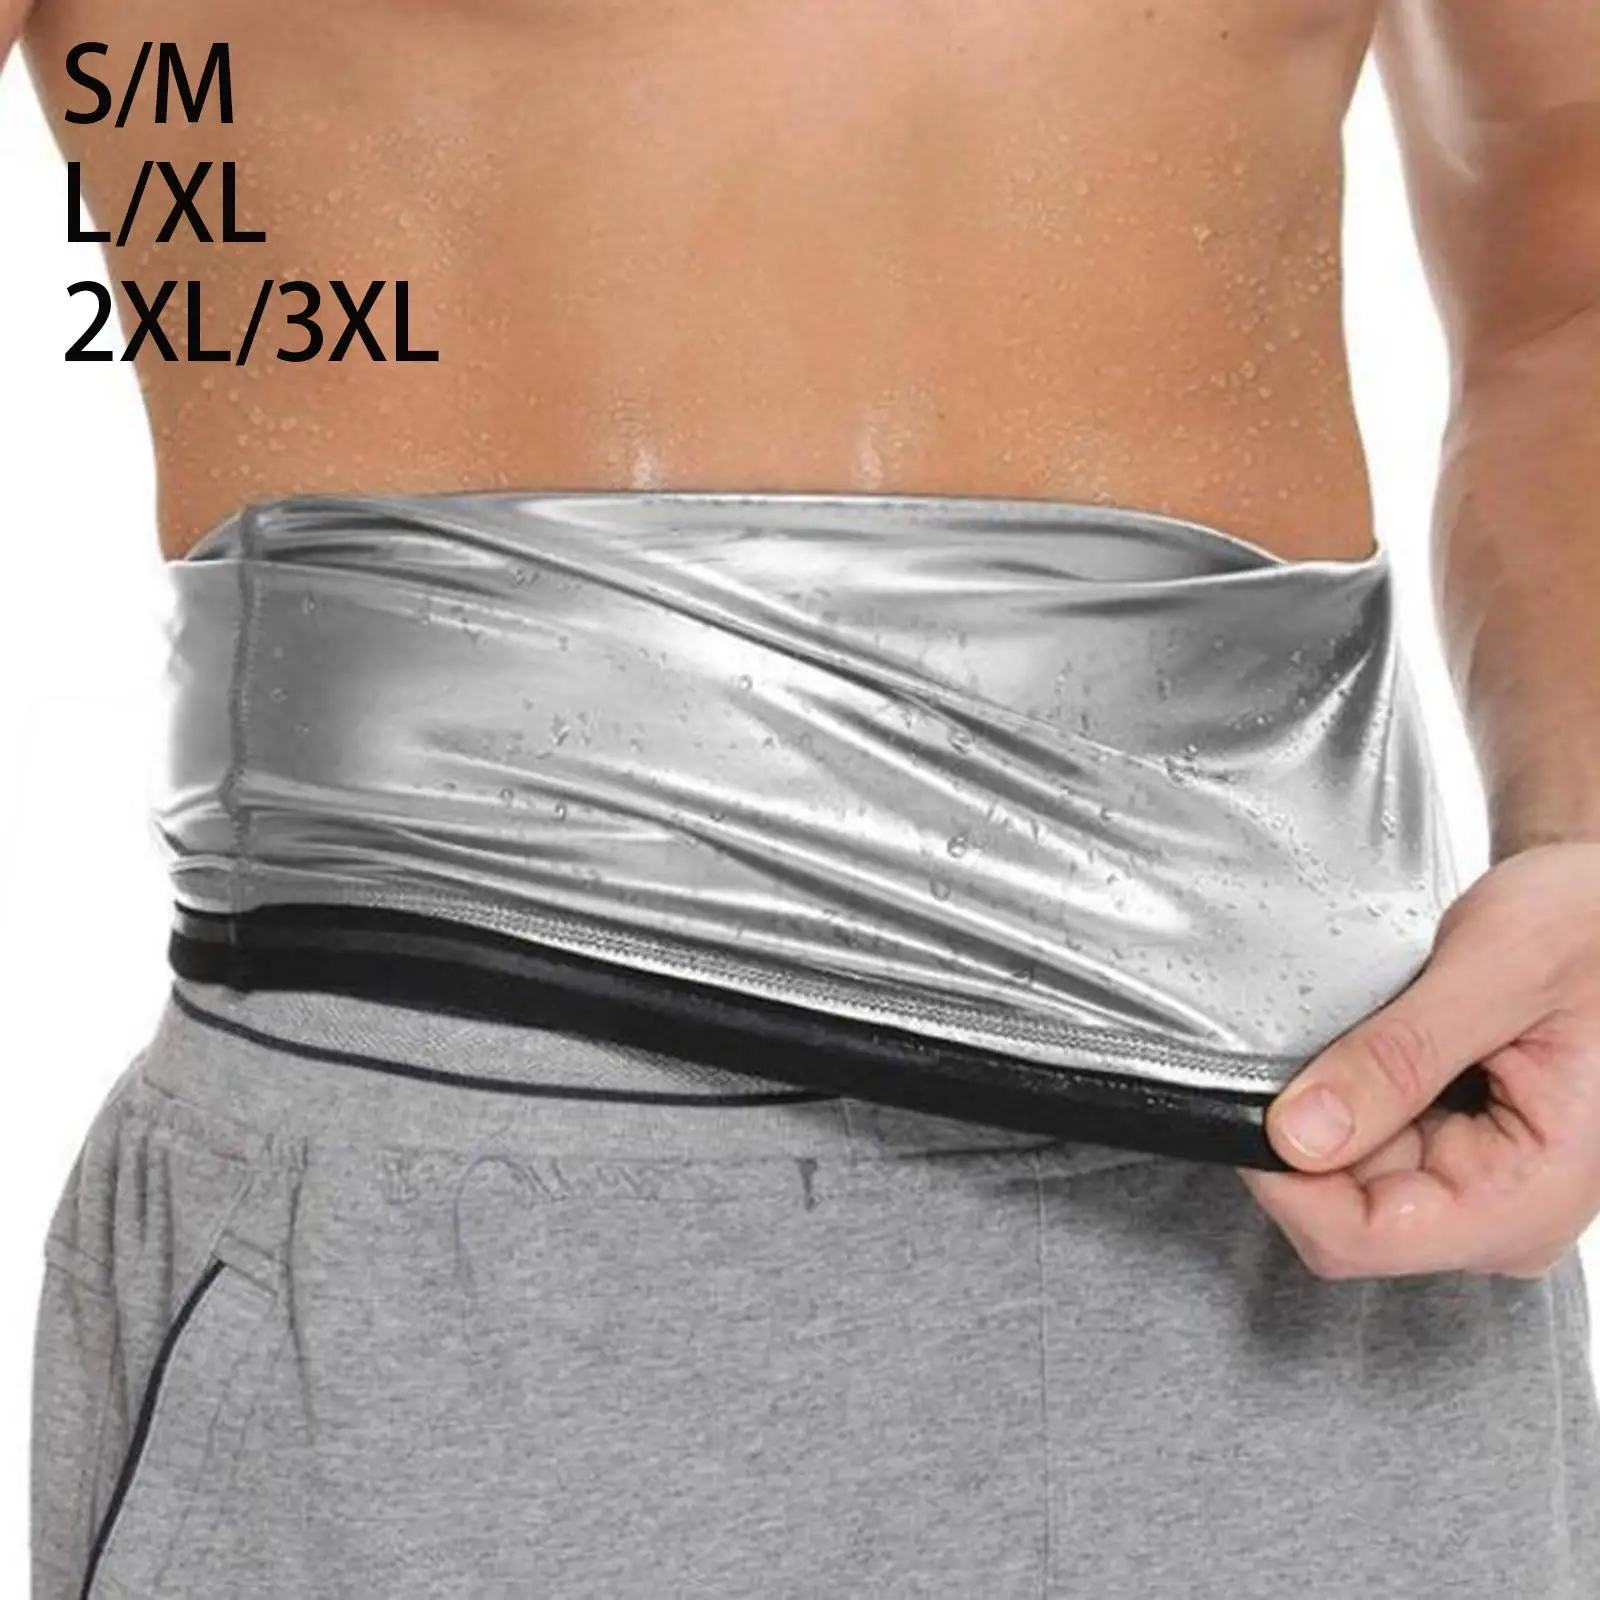 Waist Trimmer Activewear Sweatband Low Back and Abdominal Support Sauna Belt for Running Yoga Pilates Weight Lifting